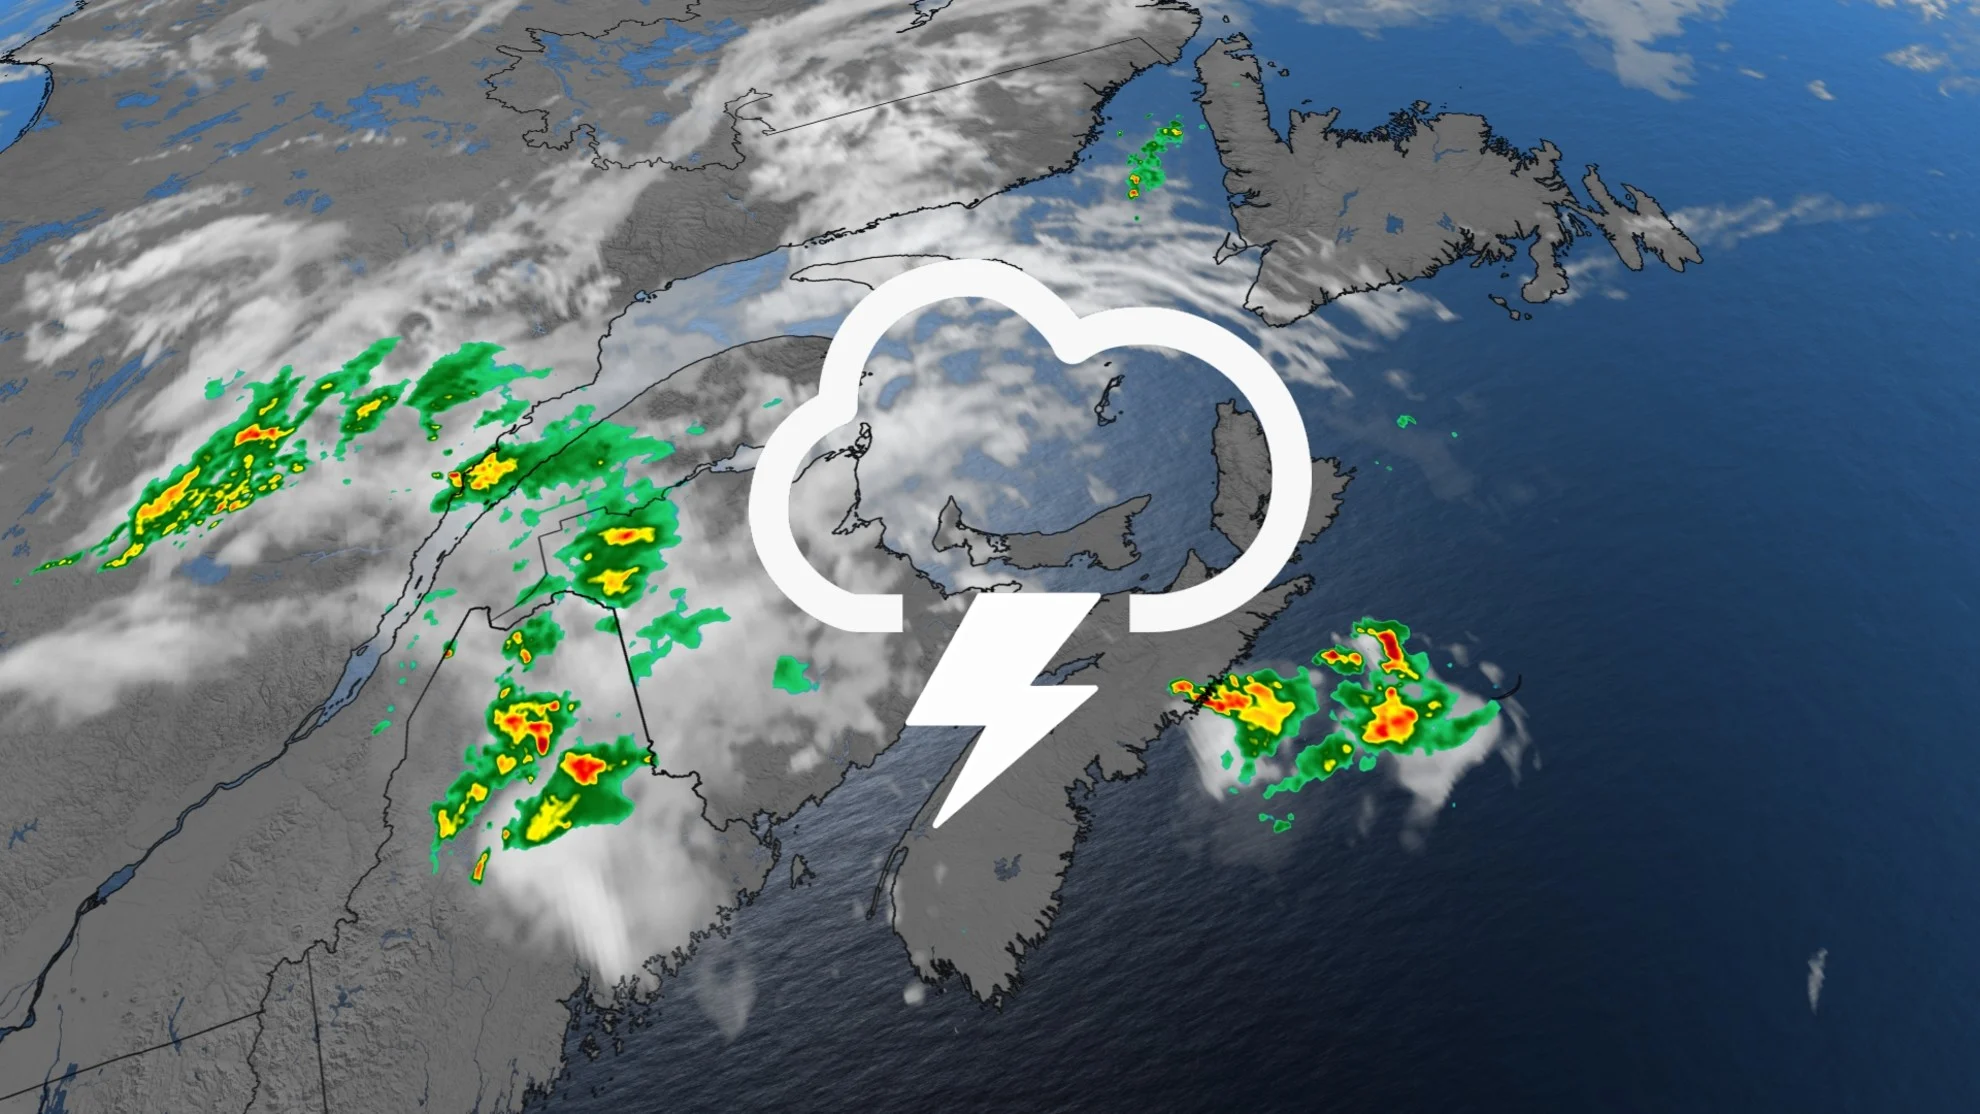 Multi-day storm threat for parts of Atlantic Canada, risk of heavy rain and wind